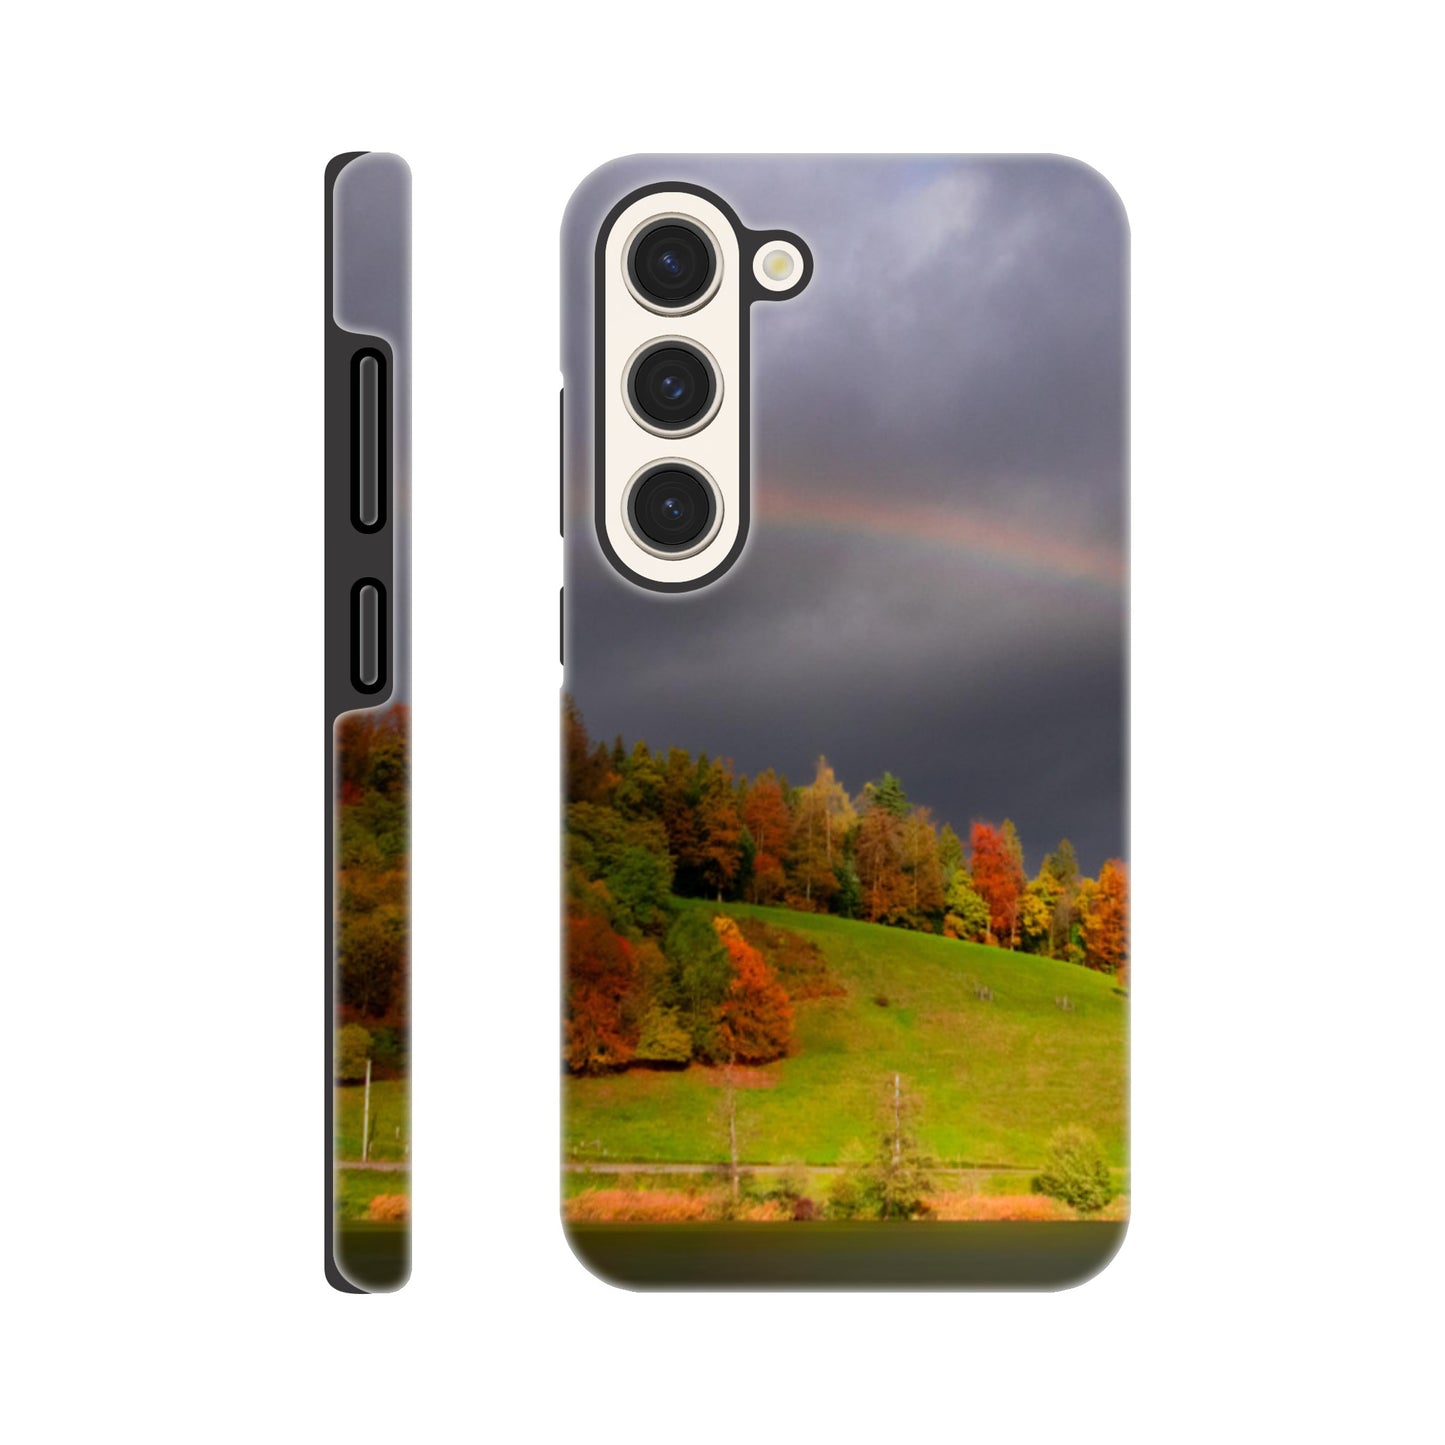 Rainbow motif hard case mobile phone case for iPhone and Samsung